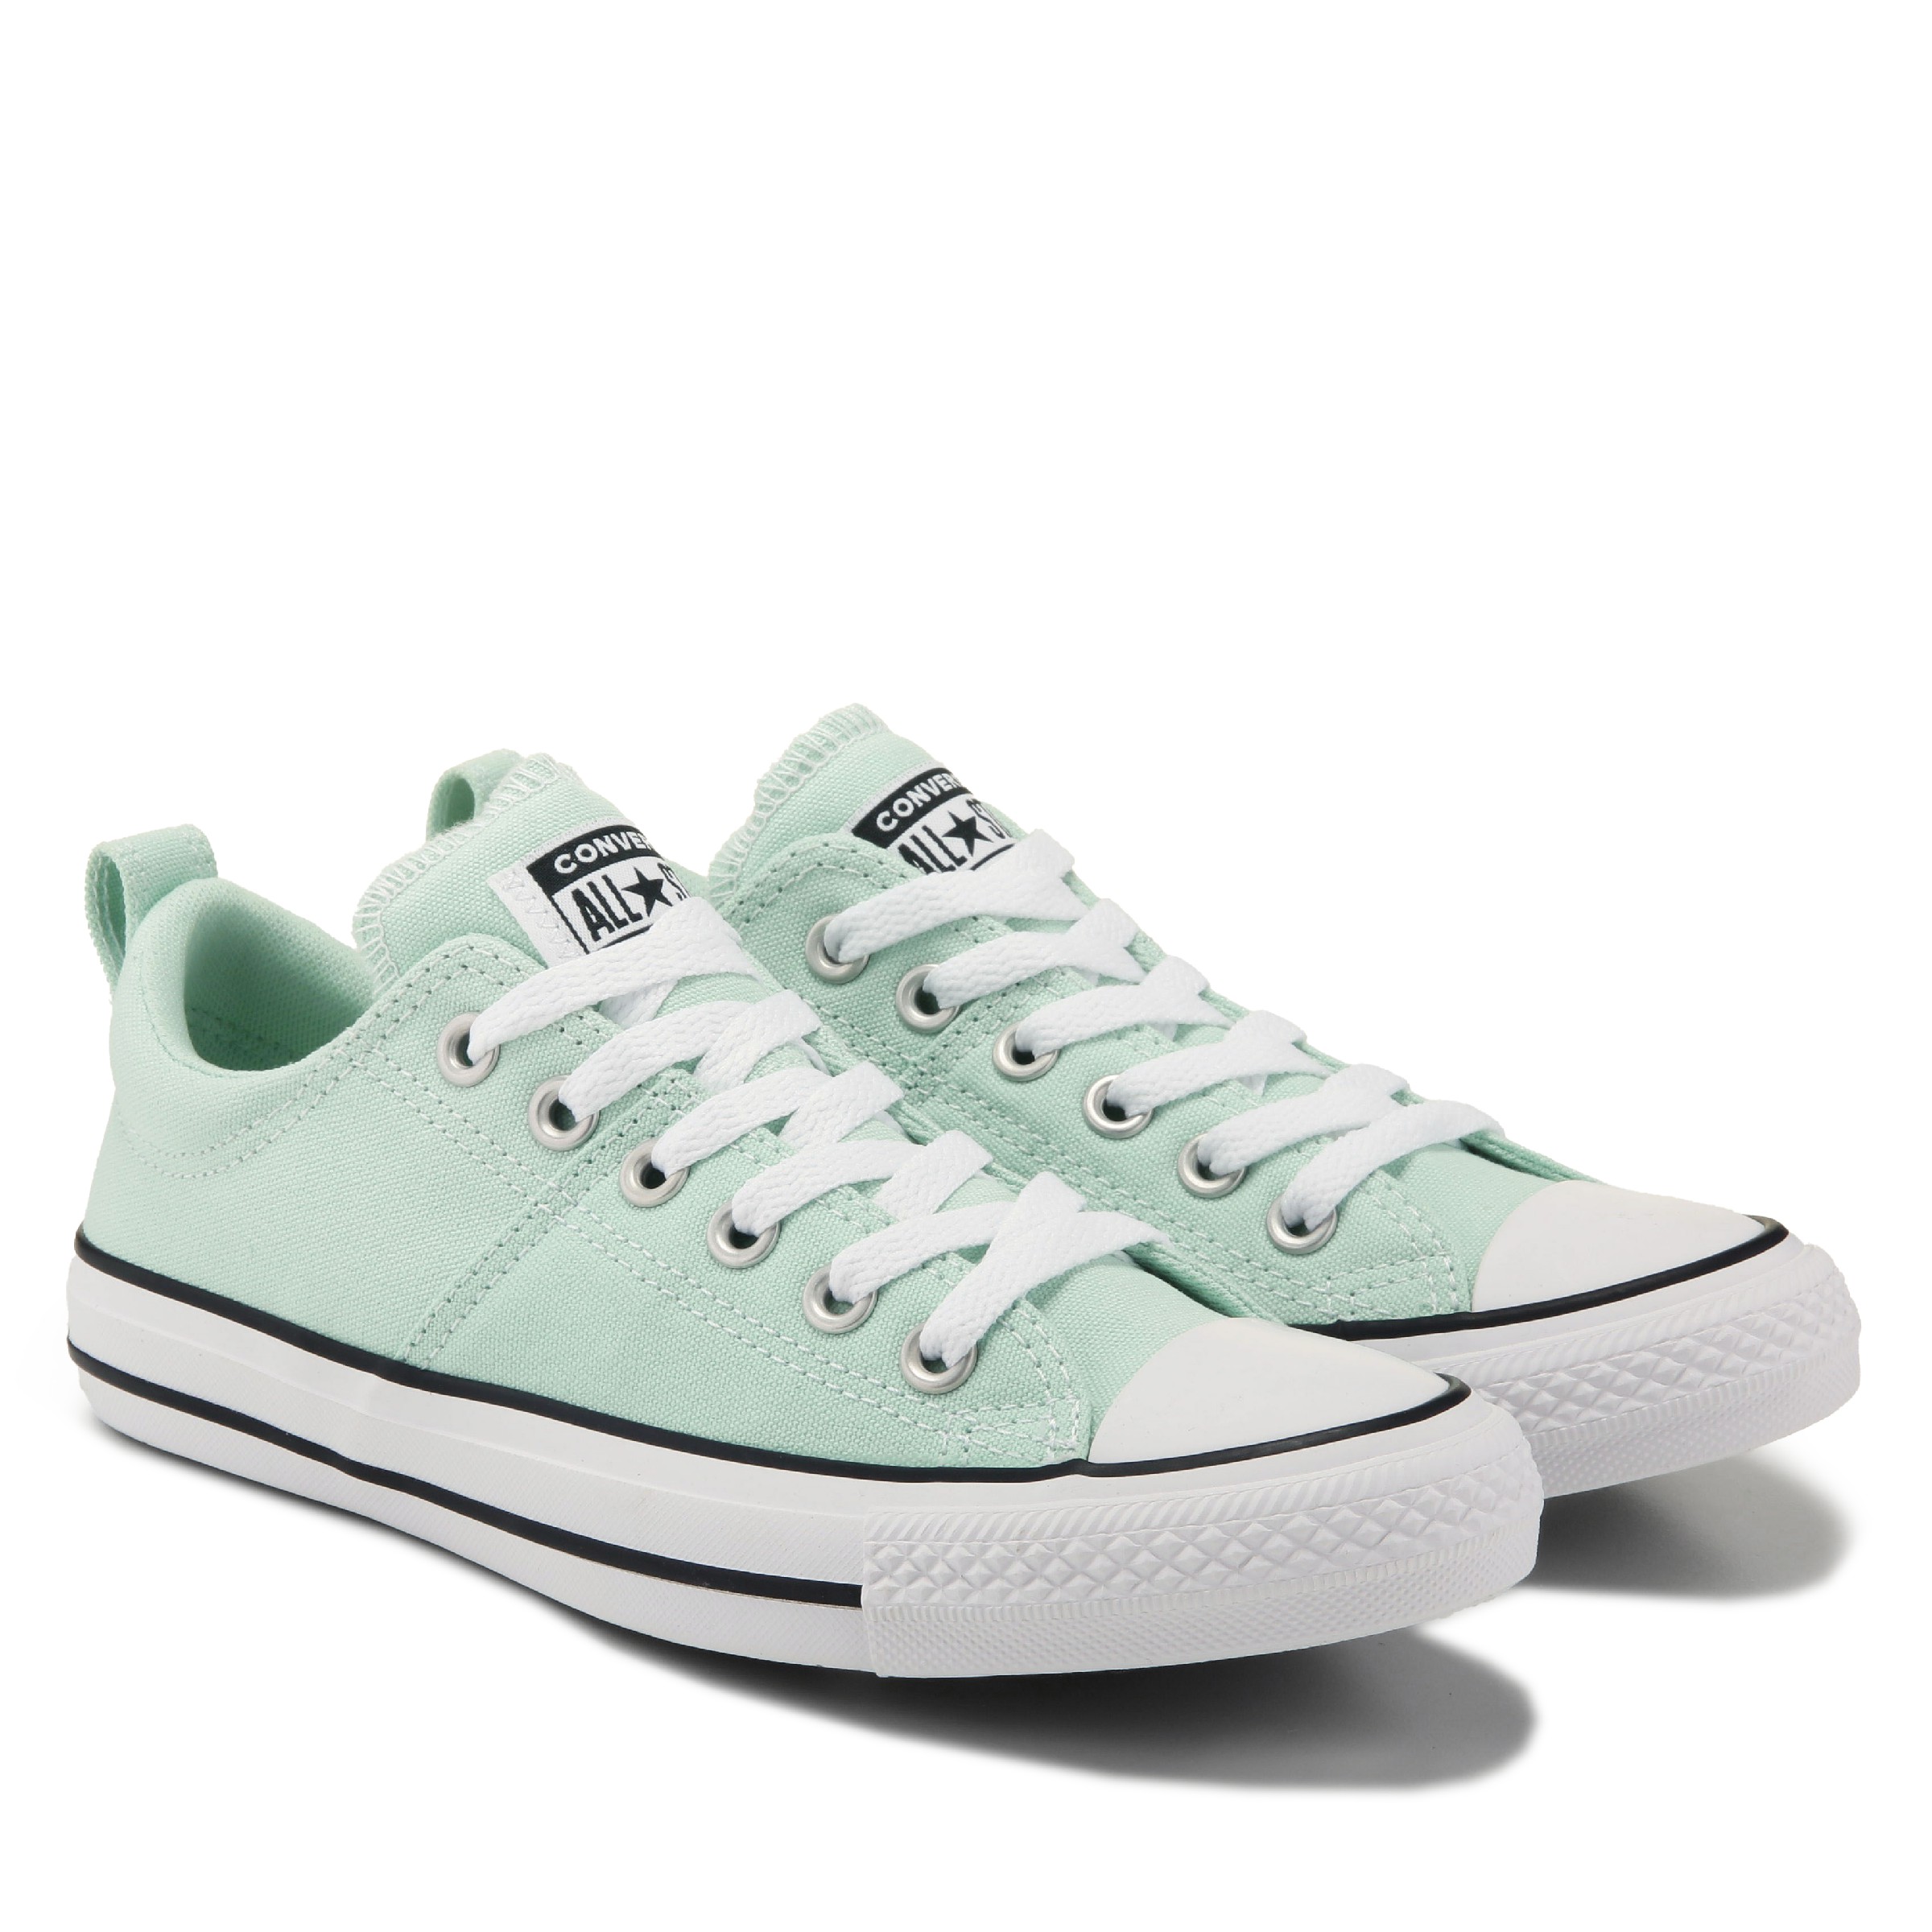 Women's Chuck Taylor All Star Madison Low Top Sneaker